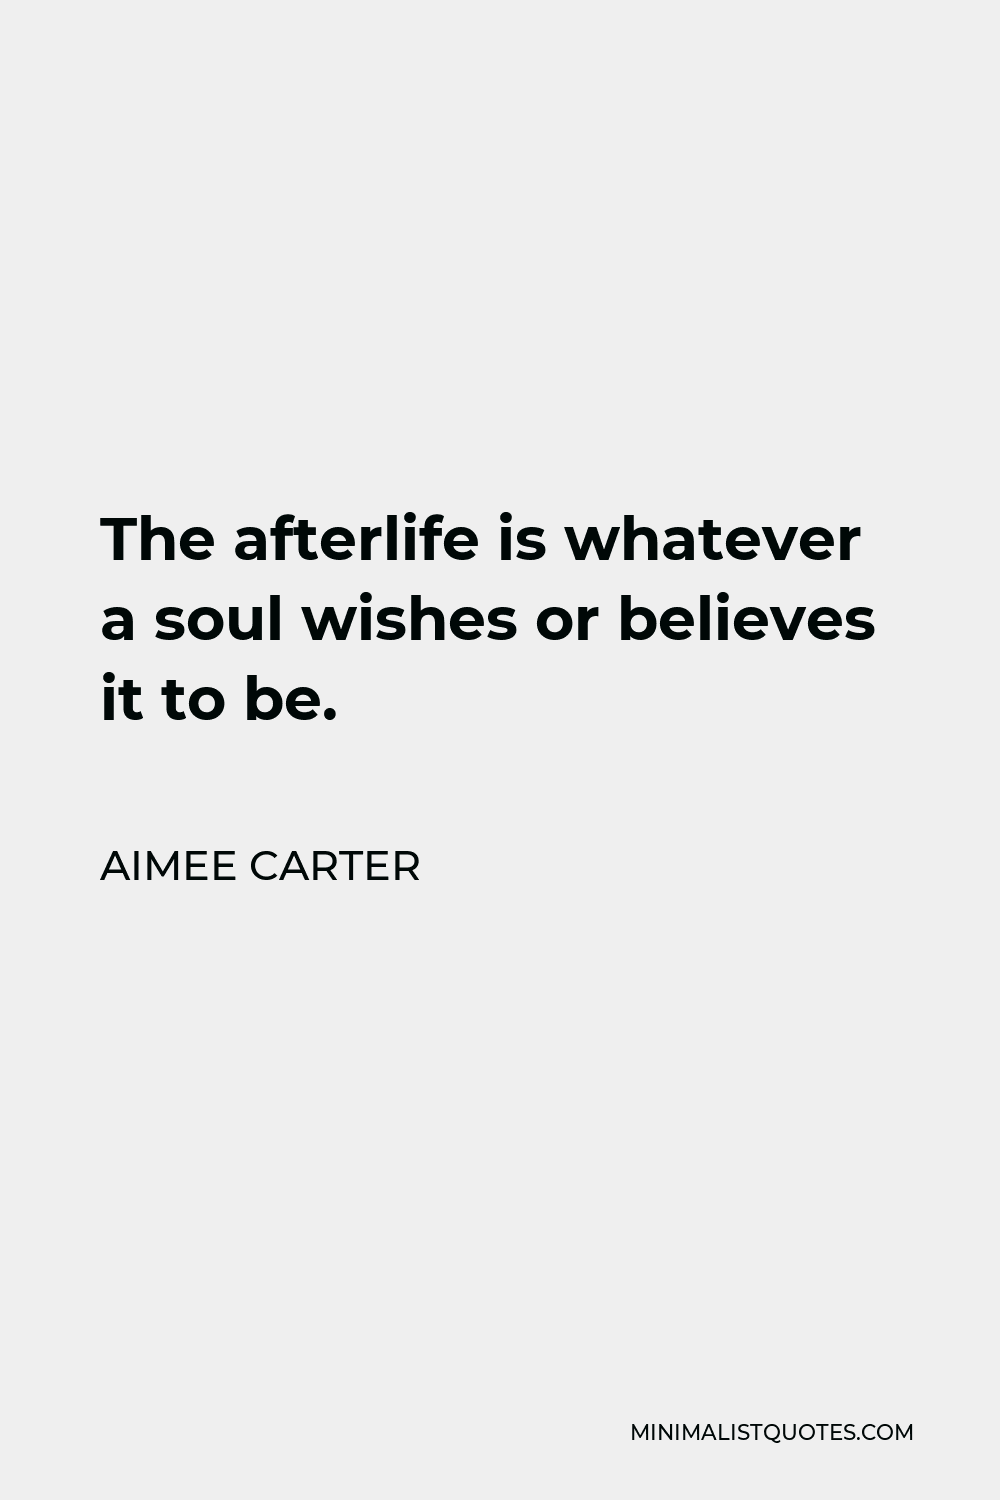 Aimee Carter Quote - The afterlife is whatever a soul wishes or believes it to be.